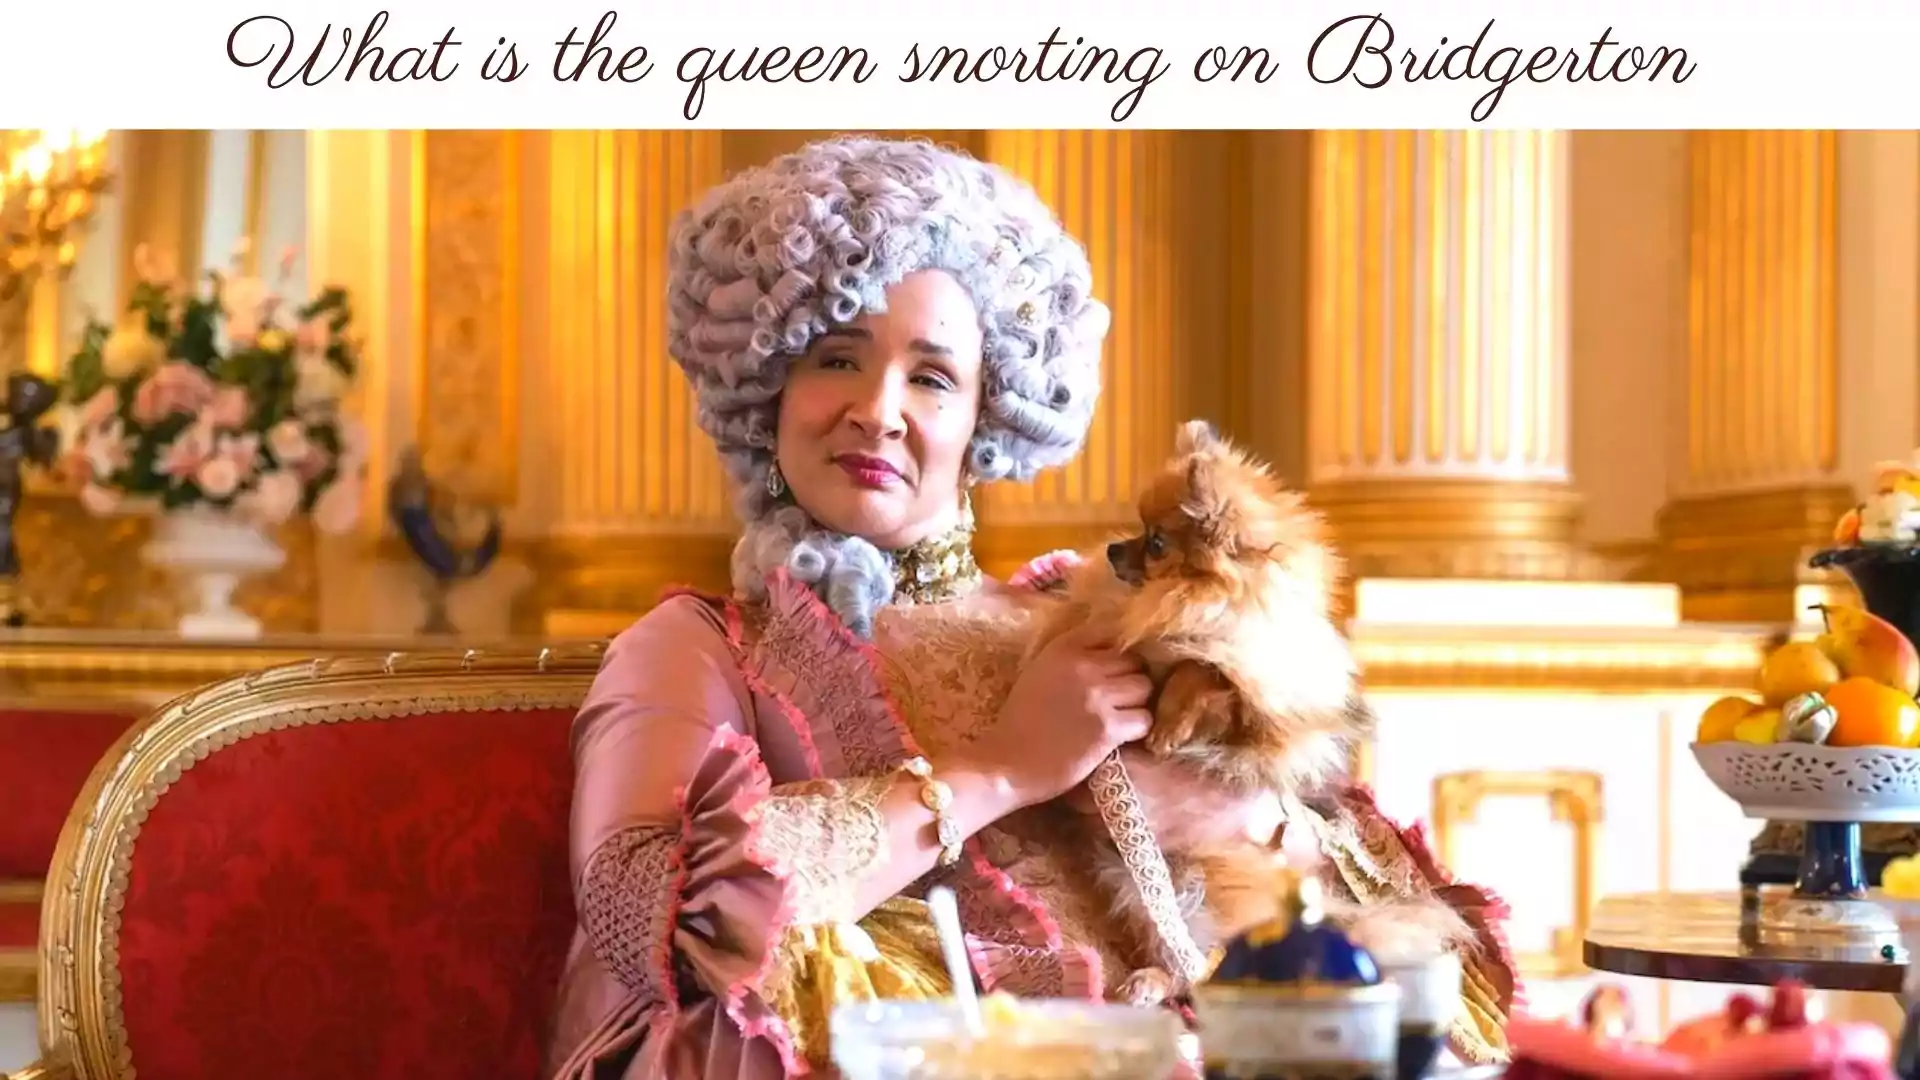 What is the queen snorting on Bridgerton Wallpaper and images